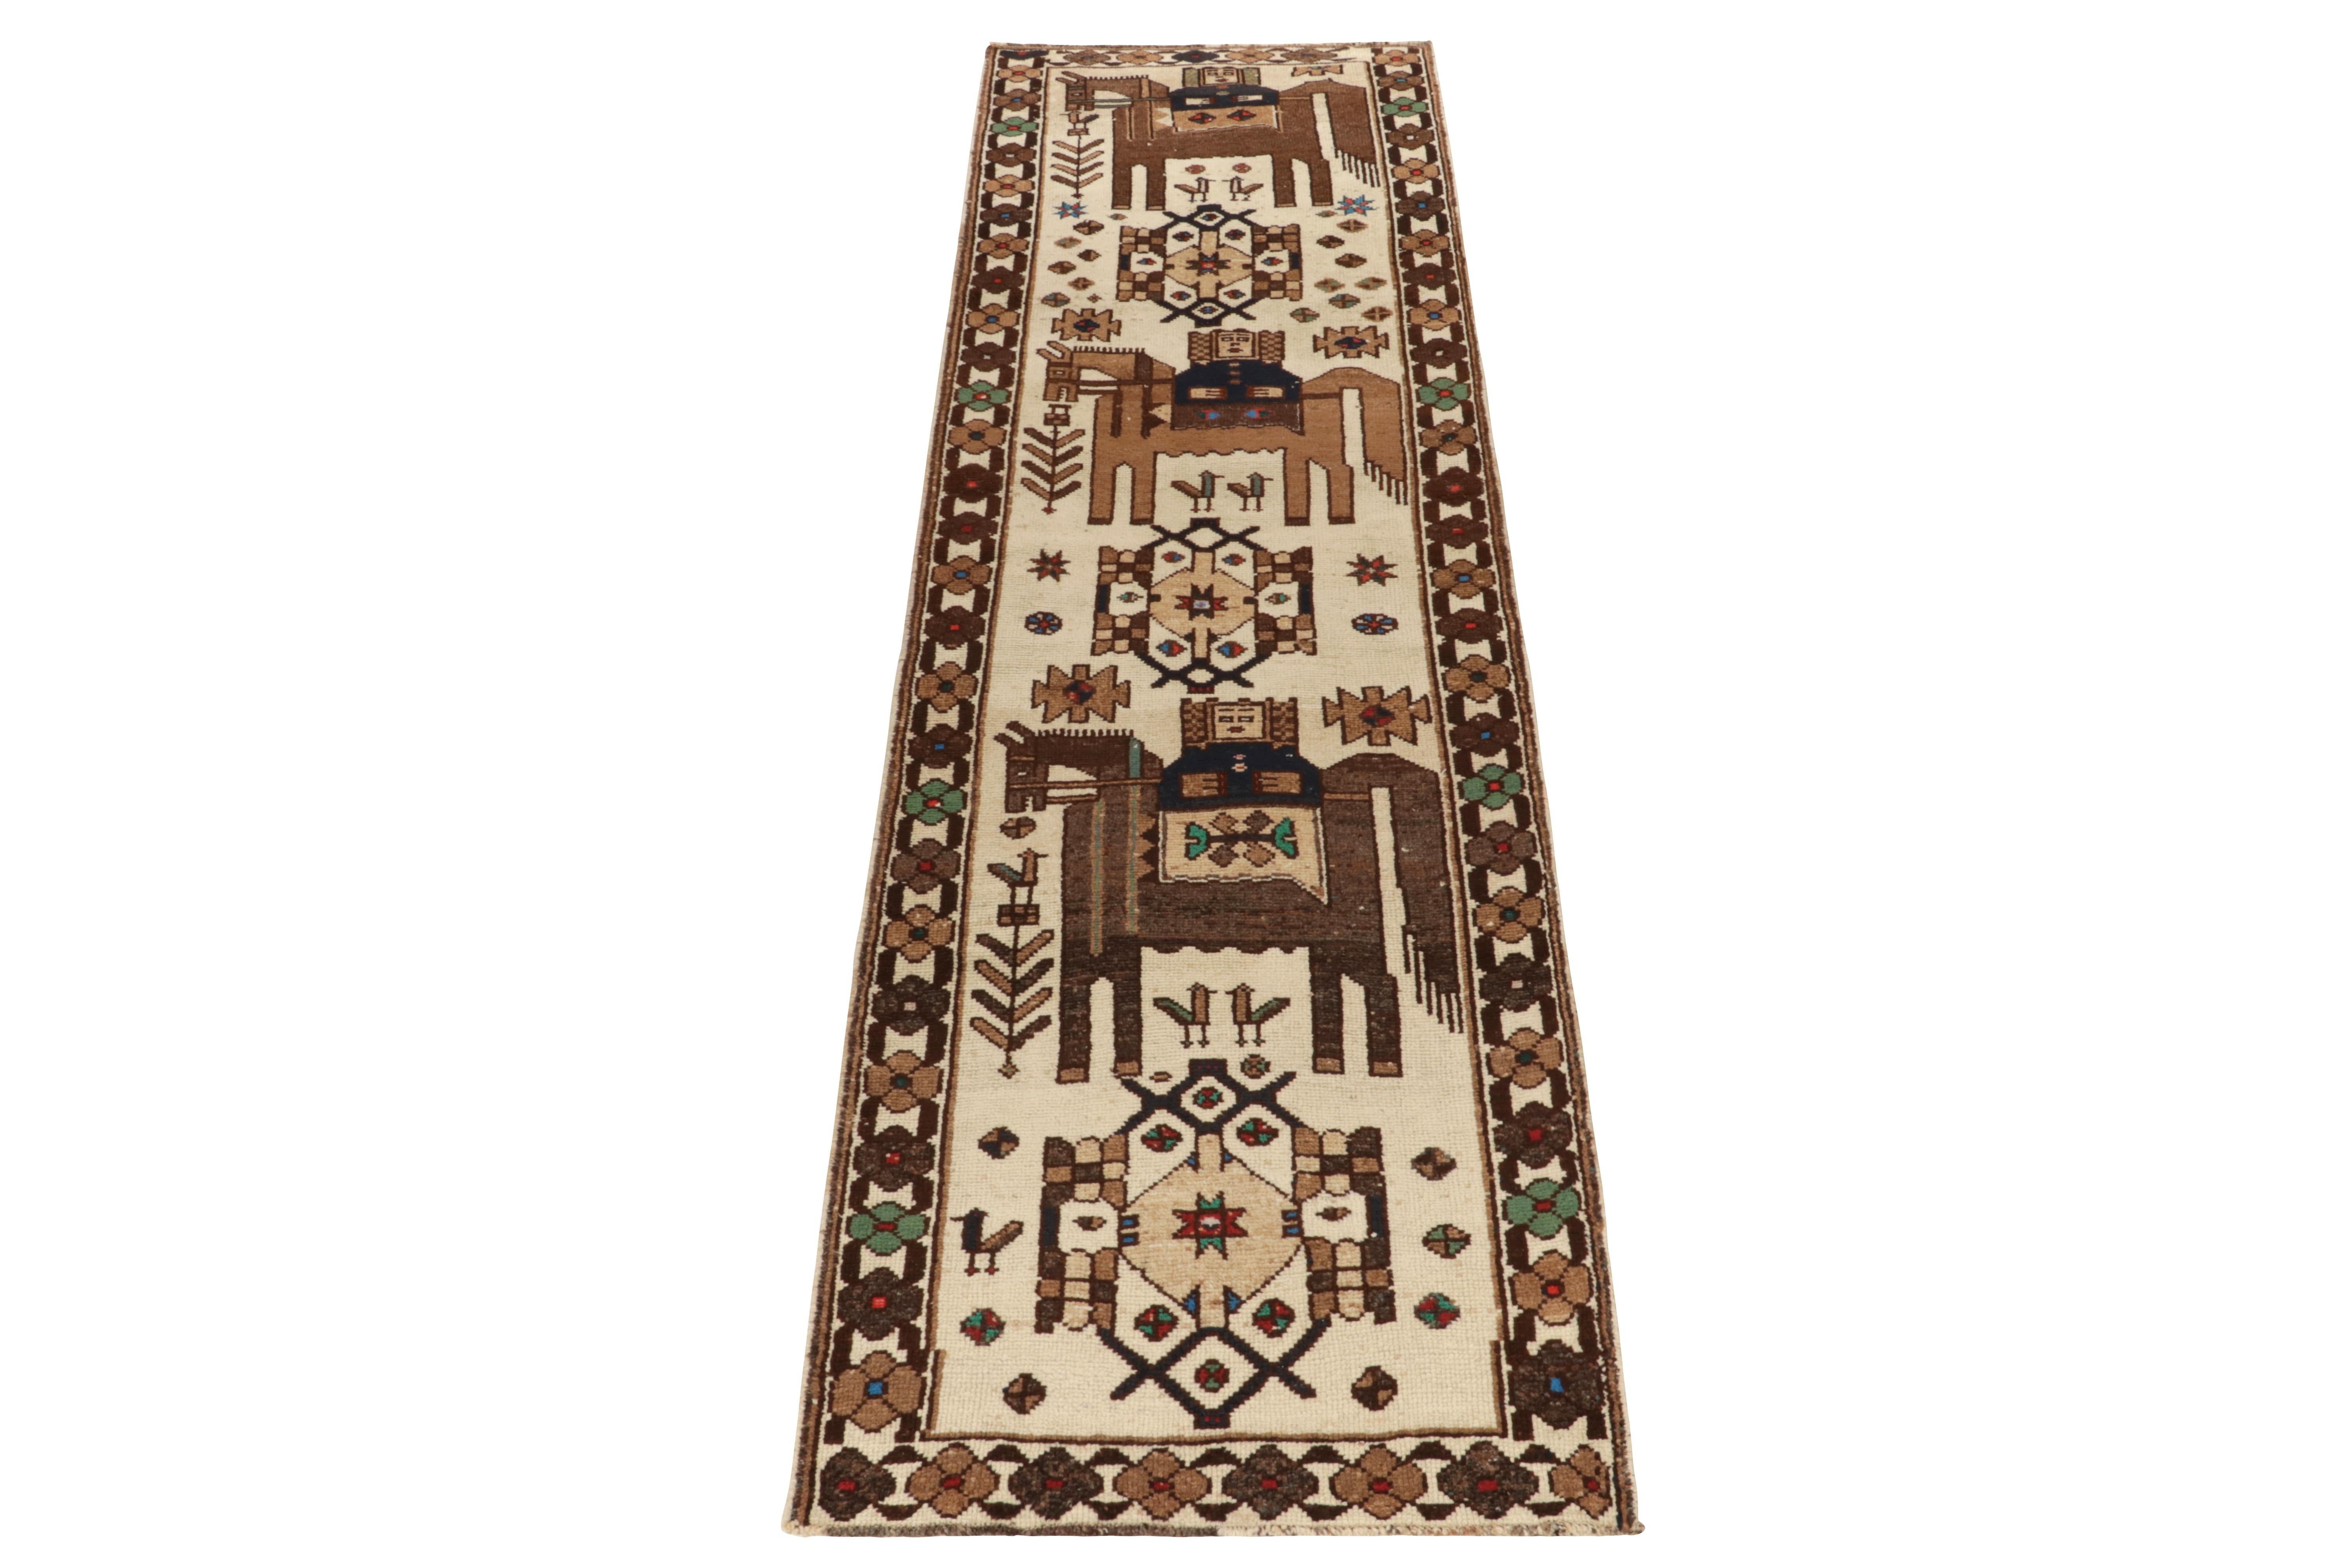 Hand-knotted in wool, a 4x12 rug from Rug & Kilim’s latest curation of rare tribal pieces. Originating from Turkey circa 1950-1960, an exemplary work of folk art in rare patterns and charming colors. 

The design enjoys rider, horse & bird